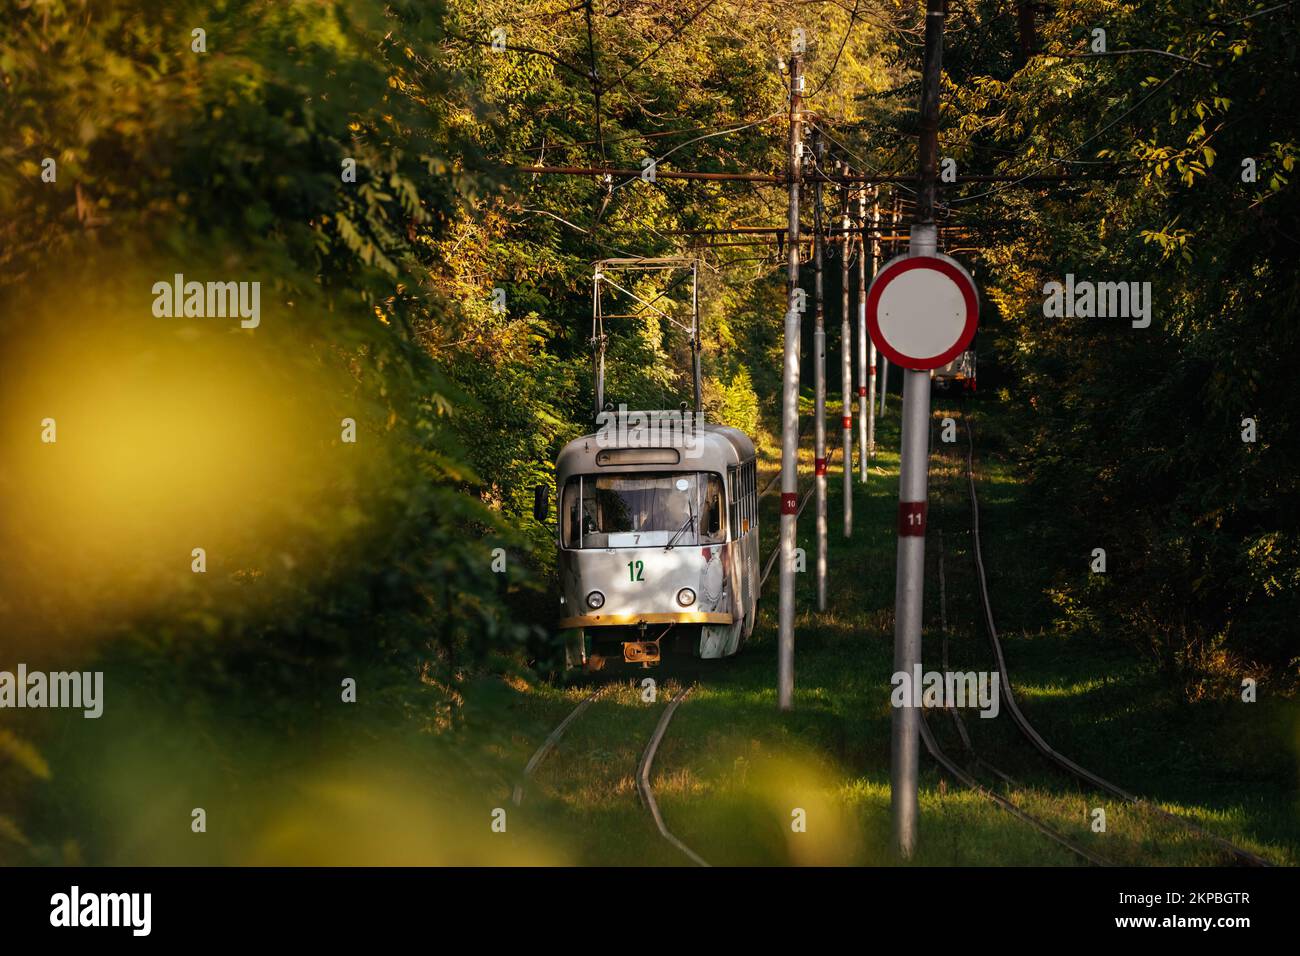 A vintage tram rides through an autumn sunny forest. Electrical streetcar in nature scene. Summer landscape in a park with tram. Electric city transport in Europe Stock Photo